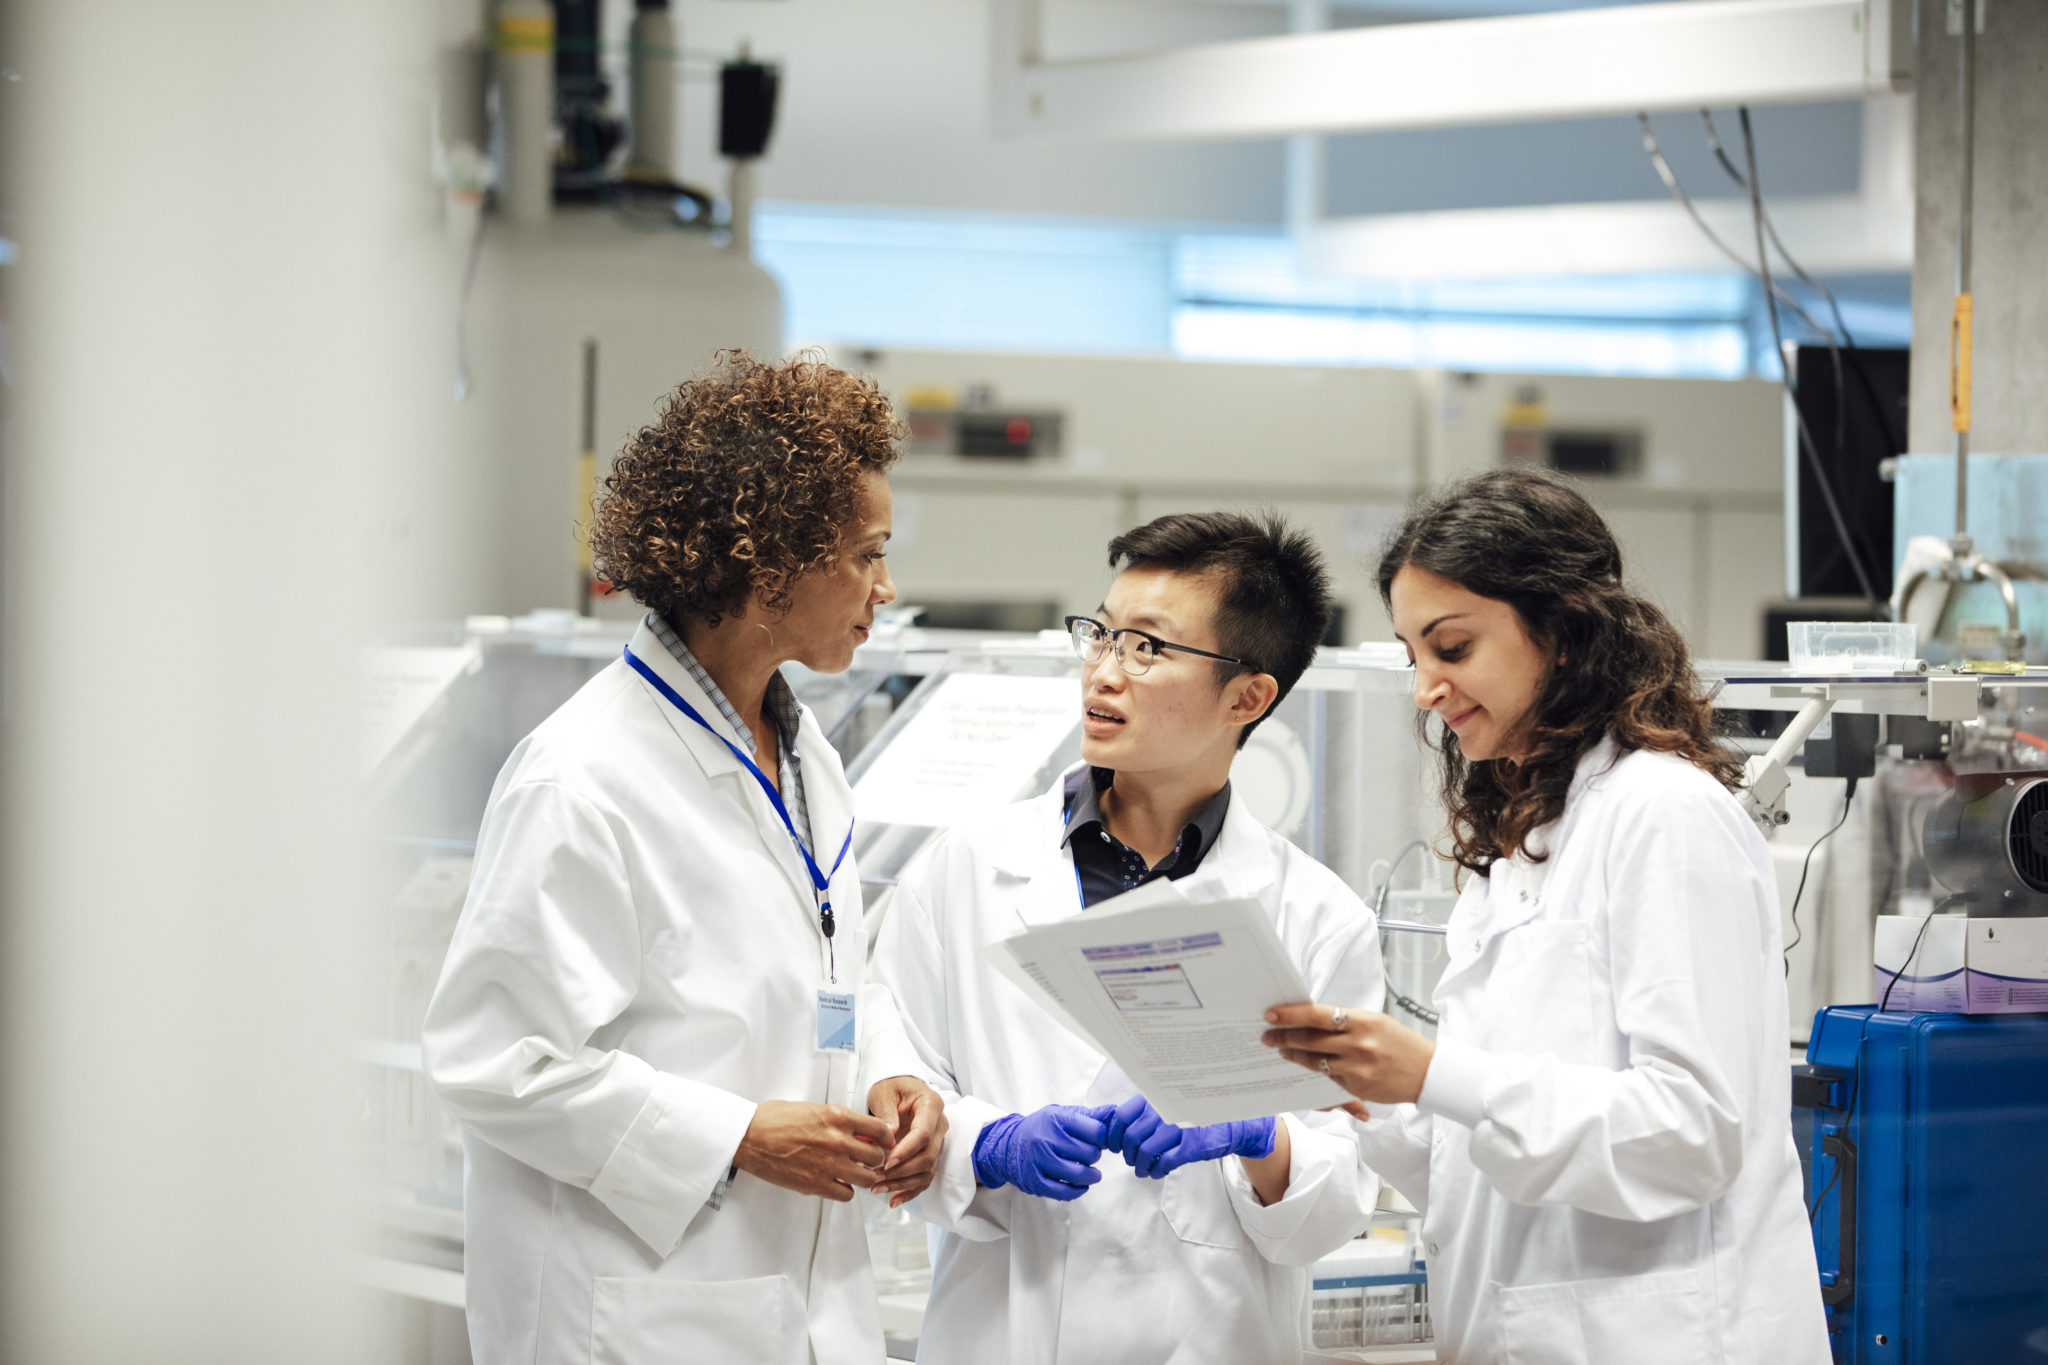 Three scientists in discussion in a lab